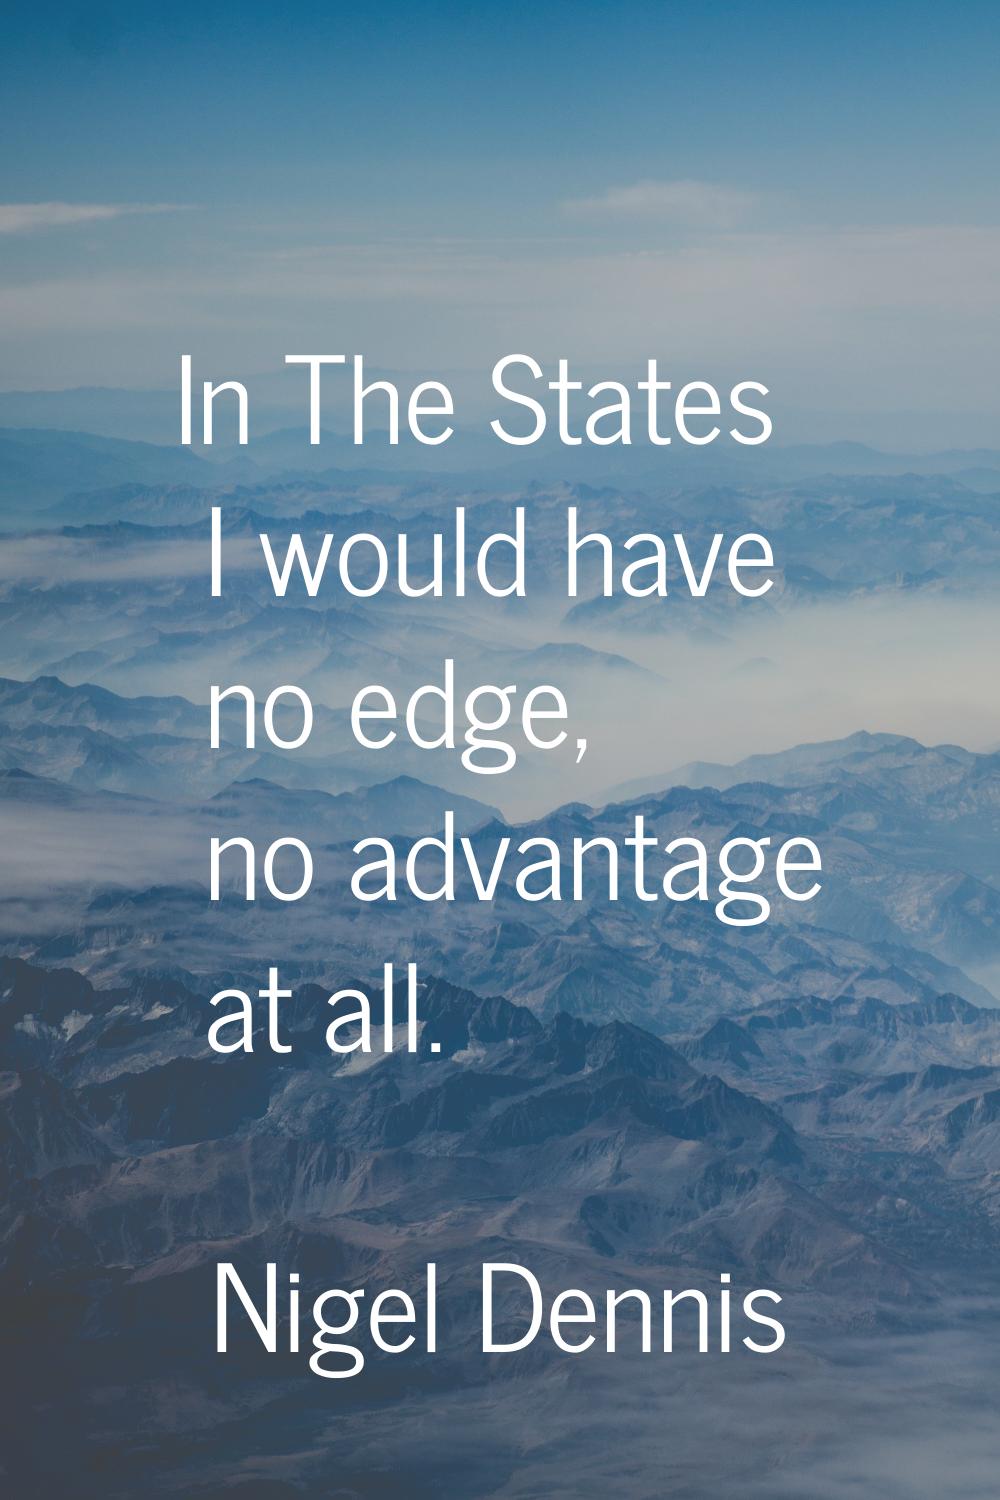 In The States I would have no edge, no advantage at all.